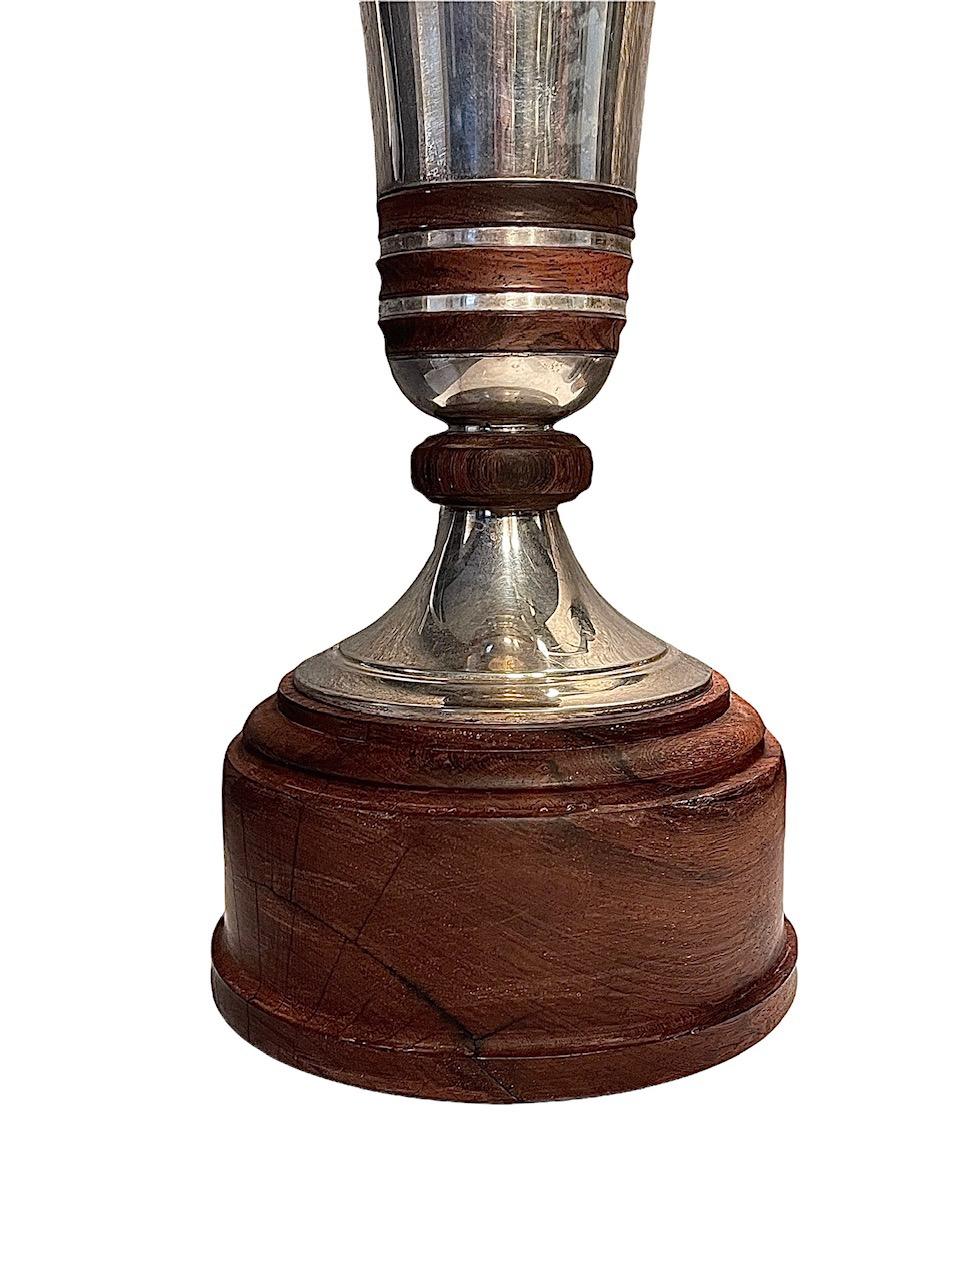 A Belgian silver vase on wood stand, by Brussels Wolfers, circa 1950. Trumpet form with wood rings, all affixed to wood base and marked on rim.
 